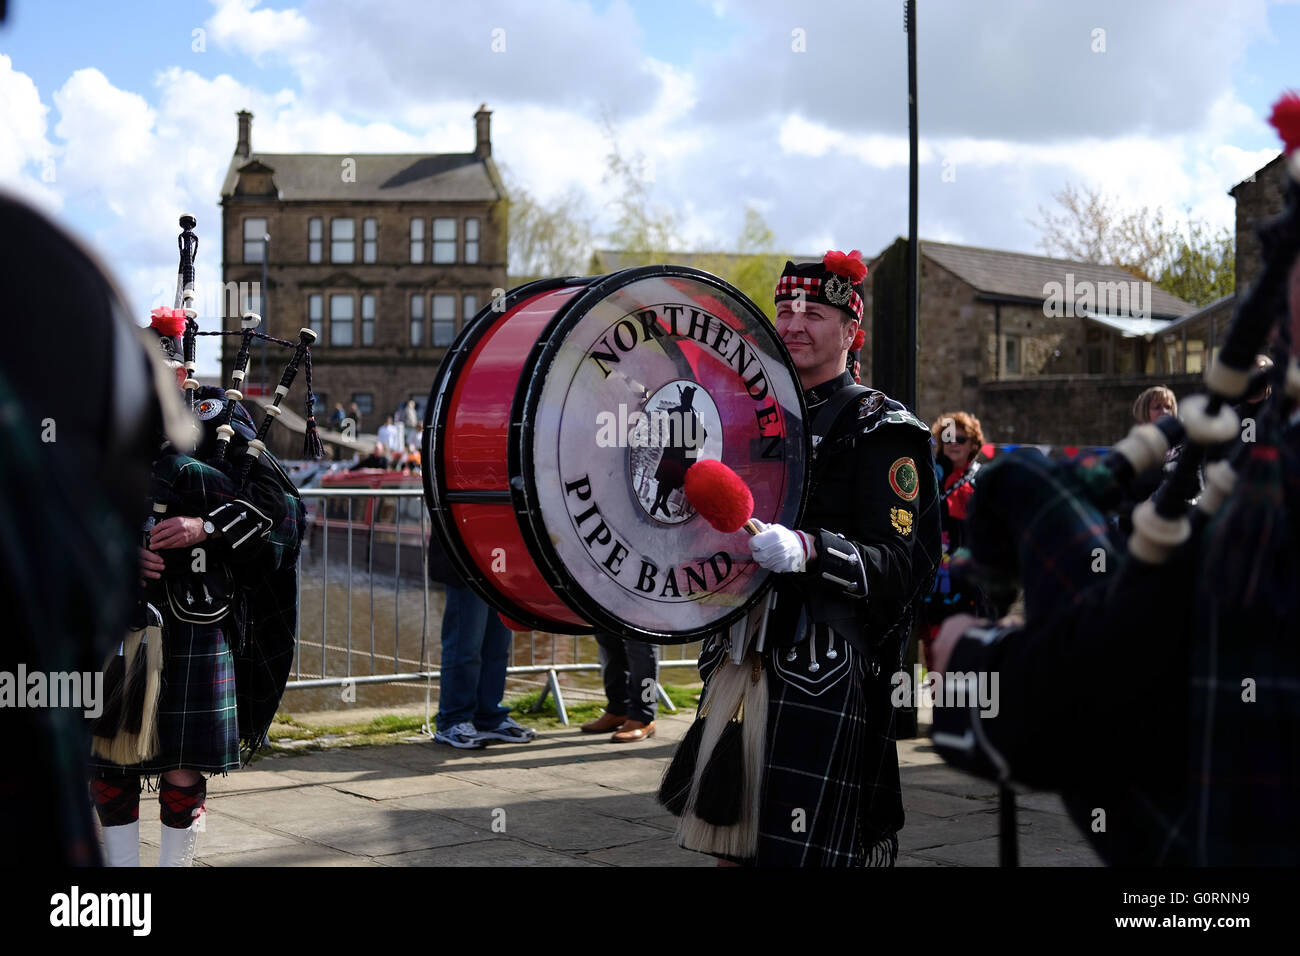 Northenden pipe band, dressed in kilts and uniform, with a drummer in action outside near bagpipes. Stock Photo